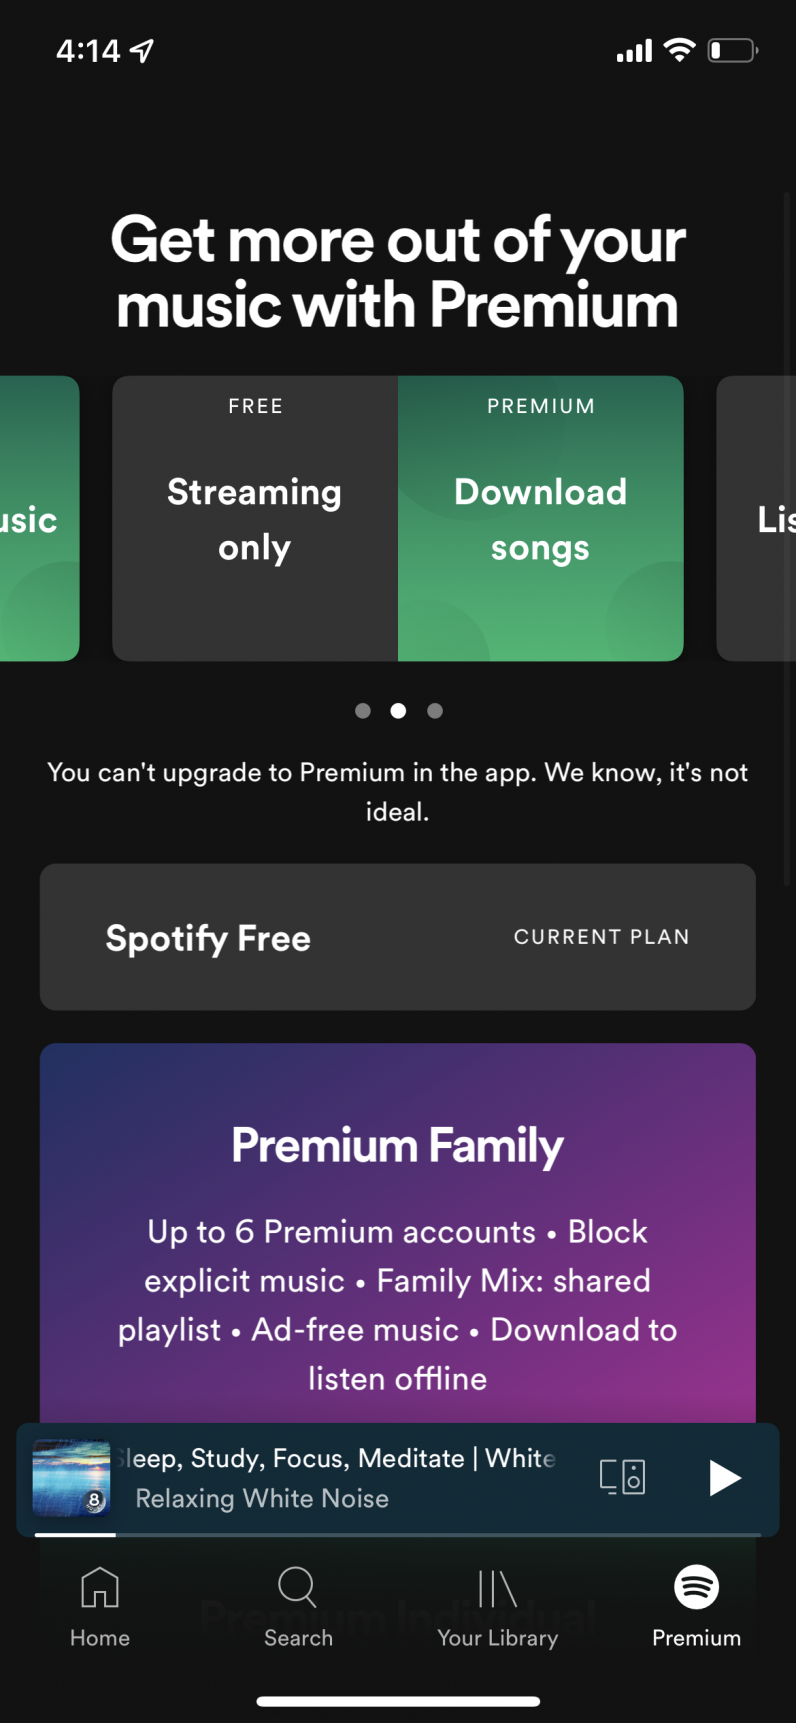 Spotify doesn't have an option to upgrade to the premium plan inside the iPhone app to avoid App Store fees